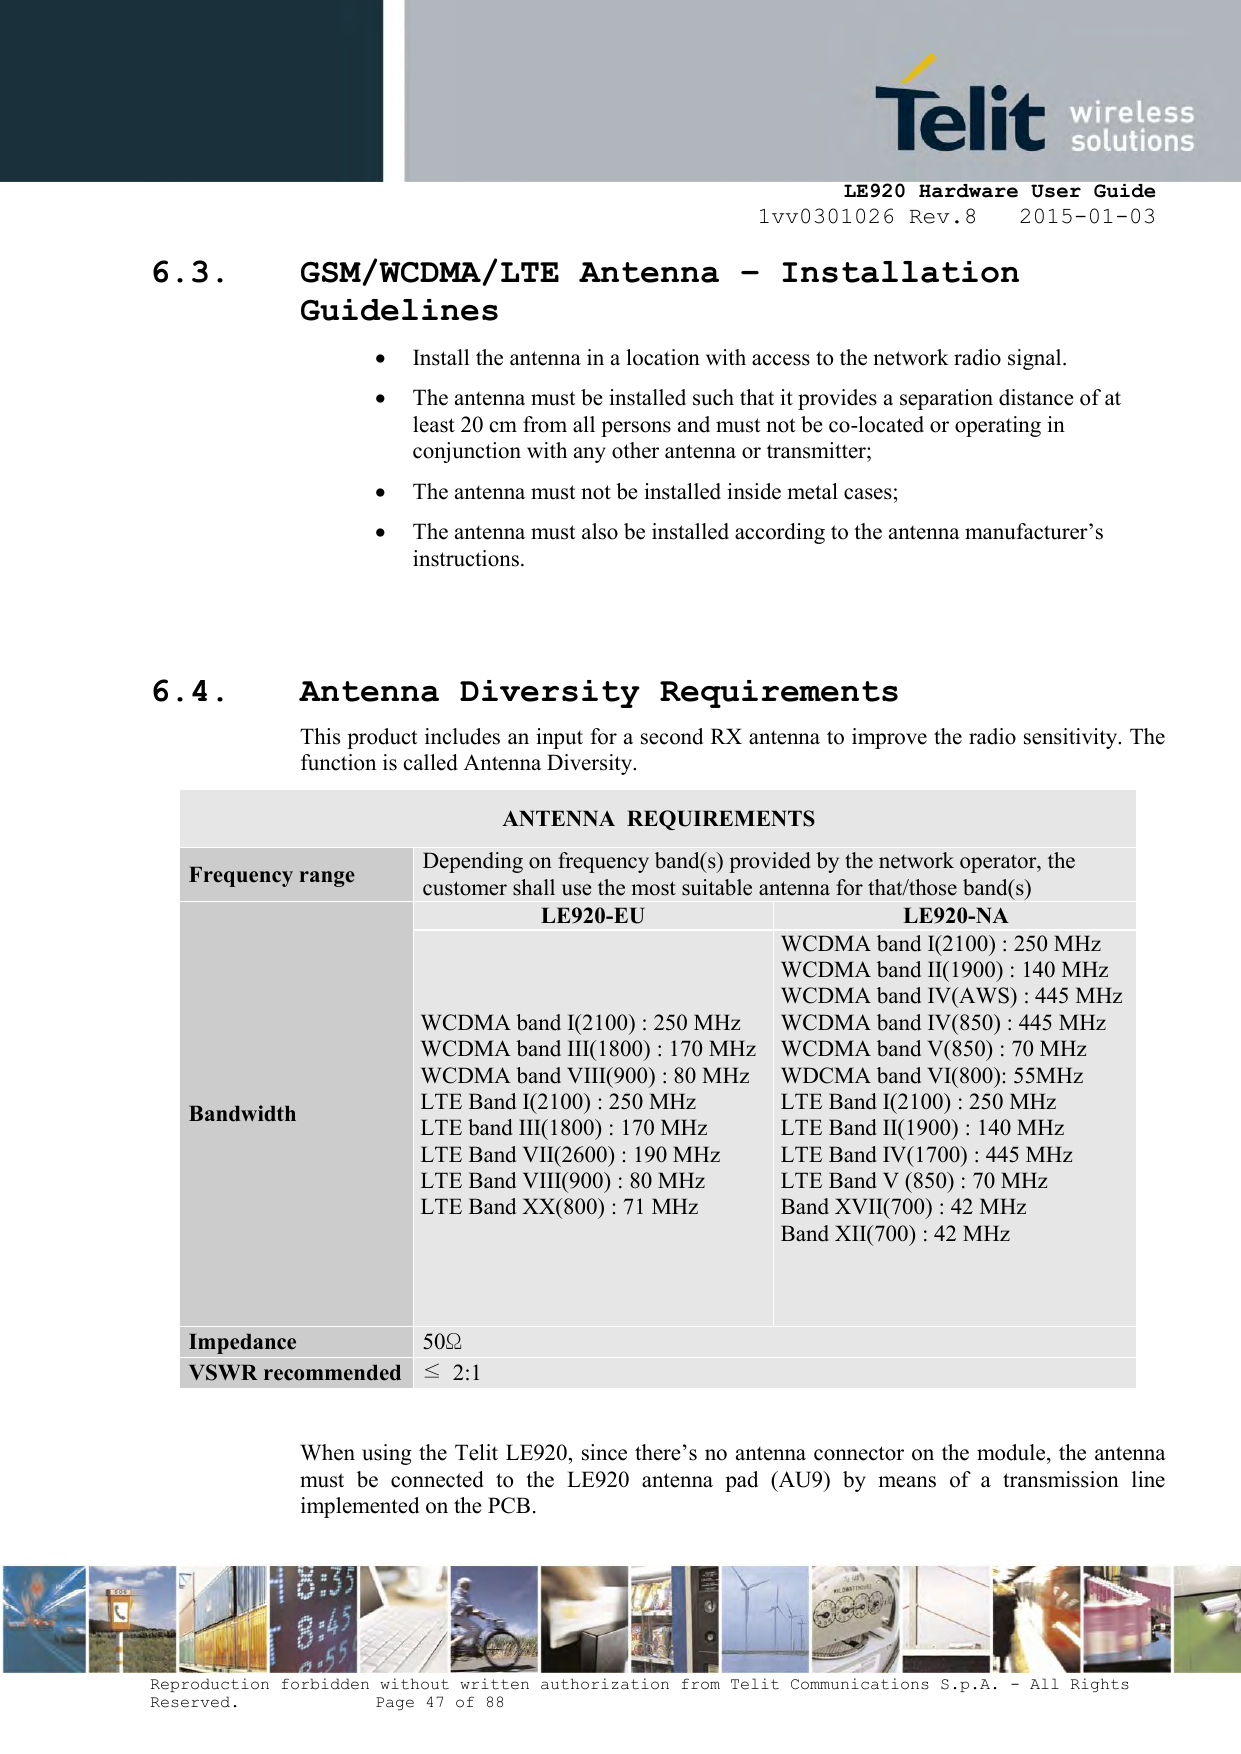     LE920 Hardware User Guide 1vv0301026 Rev.8   2015-01-03 Reproduction forbidden without written authorization from Telit Communications S.p.A. - All Rights Reserved.    Page 47 of 88  6.3. GSM/WCDMA/LTE Antenna – Installation Guidelines  Install the antenna in a location with access to the network radio signal.  The antenna must be installed such that it provides a separation distance of at least 20 cm from all persons and must not be co-located or operating in conjunction with any other antenna or transmitter;  The antenna must not be installed inside metal cases;   The antenna must also be installed according to the antenna manufacturer’s instructions.   6.4. Antenna Diversity Requirements This product includes an input for a second RX antenna to improve the radio sensitivity. The function is called Antenna Diversity. ANTENNA  REQUIREMENTS Frequency range Depending on frequency band(s) provided by the network operator, the customer shall use the most suitable antenna for that/those band(s) Bandwidth LE920-EU LE920-NA WCDMA band I(2100) : 250 MHz WCDMA band III(1800) : 170 MHz WCDMA band VIII(900) : 80 MHz LTE Band I(2100) : 250 MHz LTE band III(1800) : 170 MHz LTE Band VII(2600) : 190 MHz LTE Band VIII(900) : 80 MHz LTE Band XX(800) : 71 MHz  WCDMA band I(2100) : 250 MHz WCDMA band II(1900) : 140 MHz WCDMA band IV(AWS) : 445 MHz WCDMA band IV(850) : 445 MHz WCDMA band V(850) : 70 MHz WDCMA band VI(800): 55MHz LTE Band I(2100) : 250 MHz LTE Band II(1900) : 140 MHz LTE Band IV(1700) : 445 MHz LTE Band V (850) : 70 MHz Band XVII(700) : 42 MHz  Band XII(700) : 42 MHz     Impedance 50Ω VSWR recommended ≤  2:1  When using the Telit LE920, since there’s no antenna connector on the module, the antenna must  be  connected  to  the  LE920  antenna  pad  (AU9)  by  means  of  a  transmission  line implemented on the PCB.  